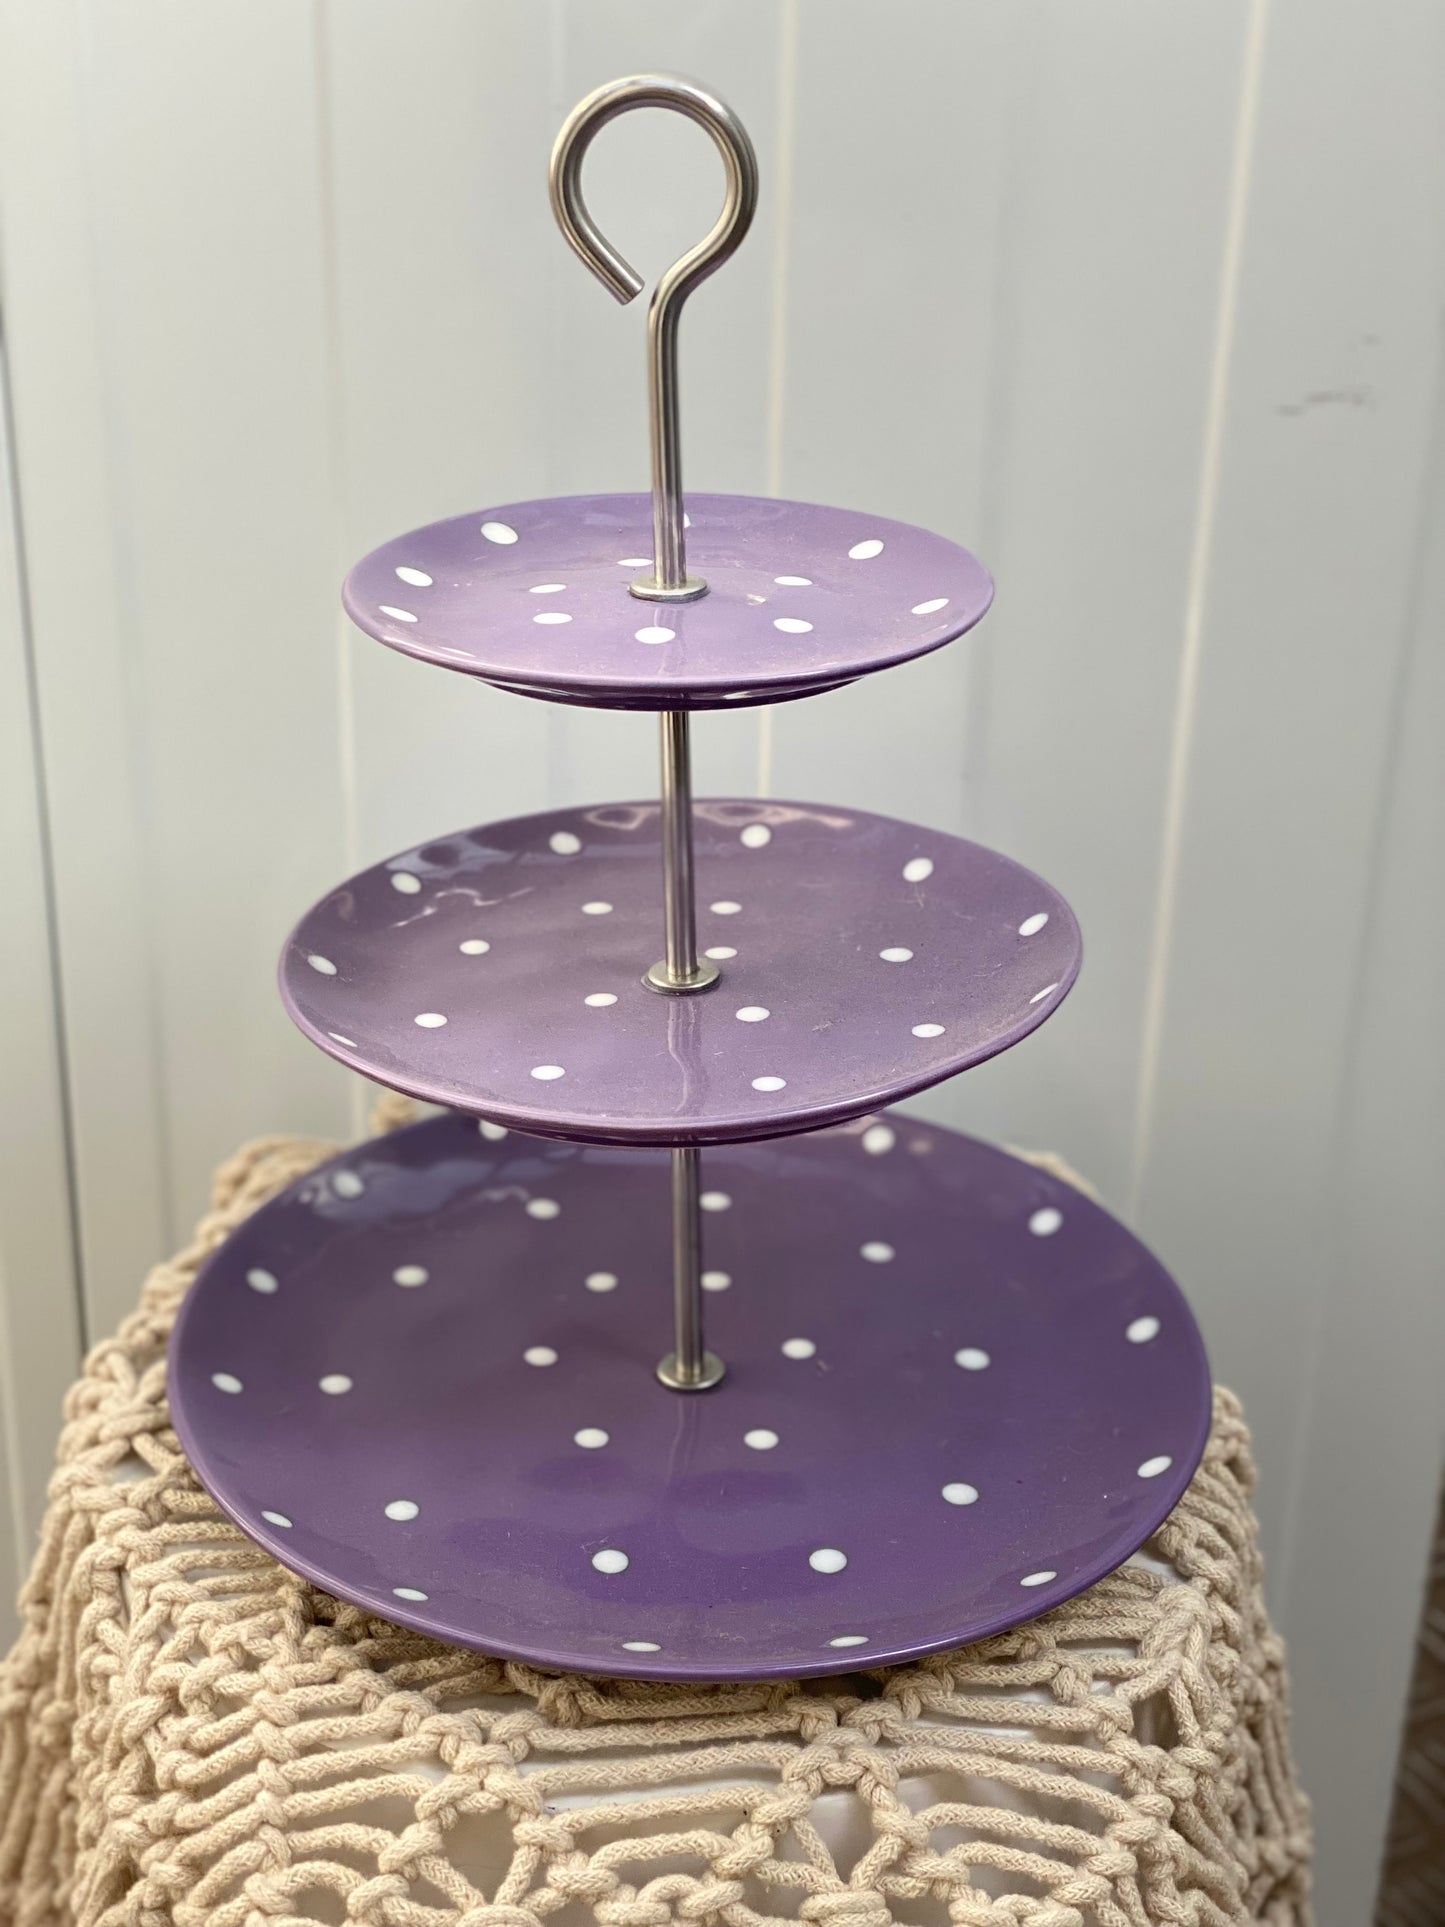 3 Tier Cake Stands